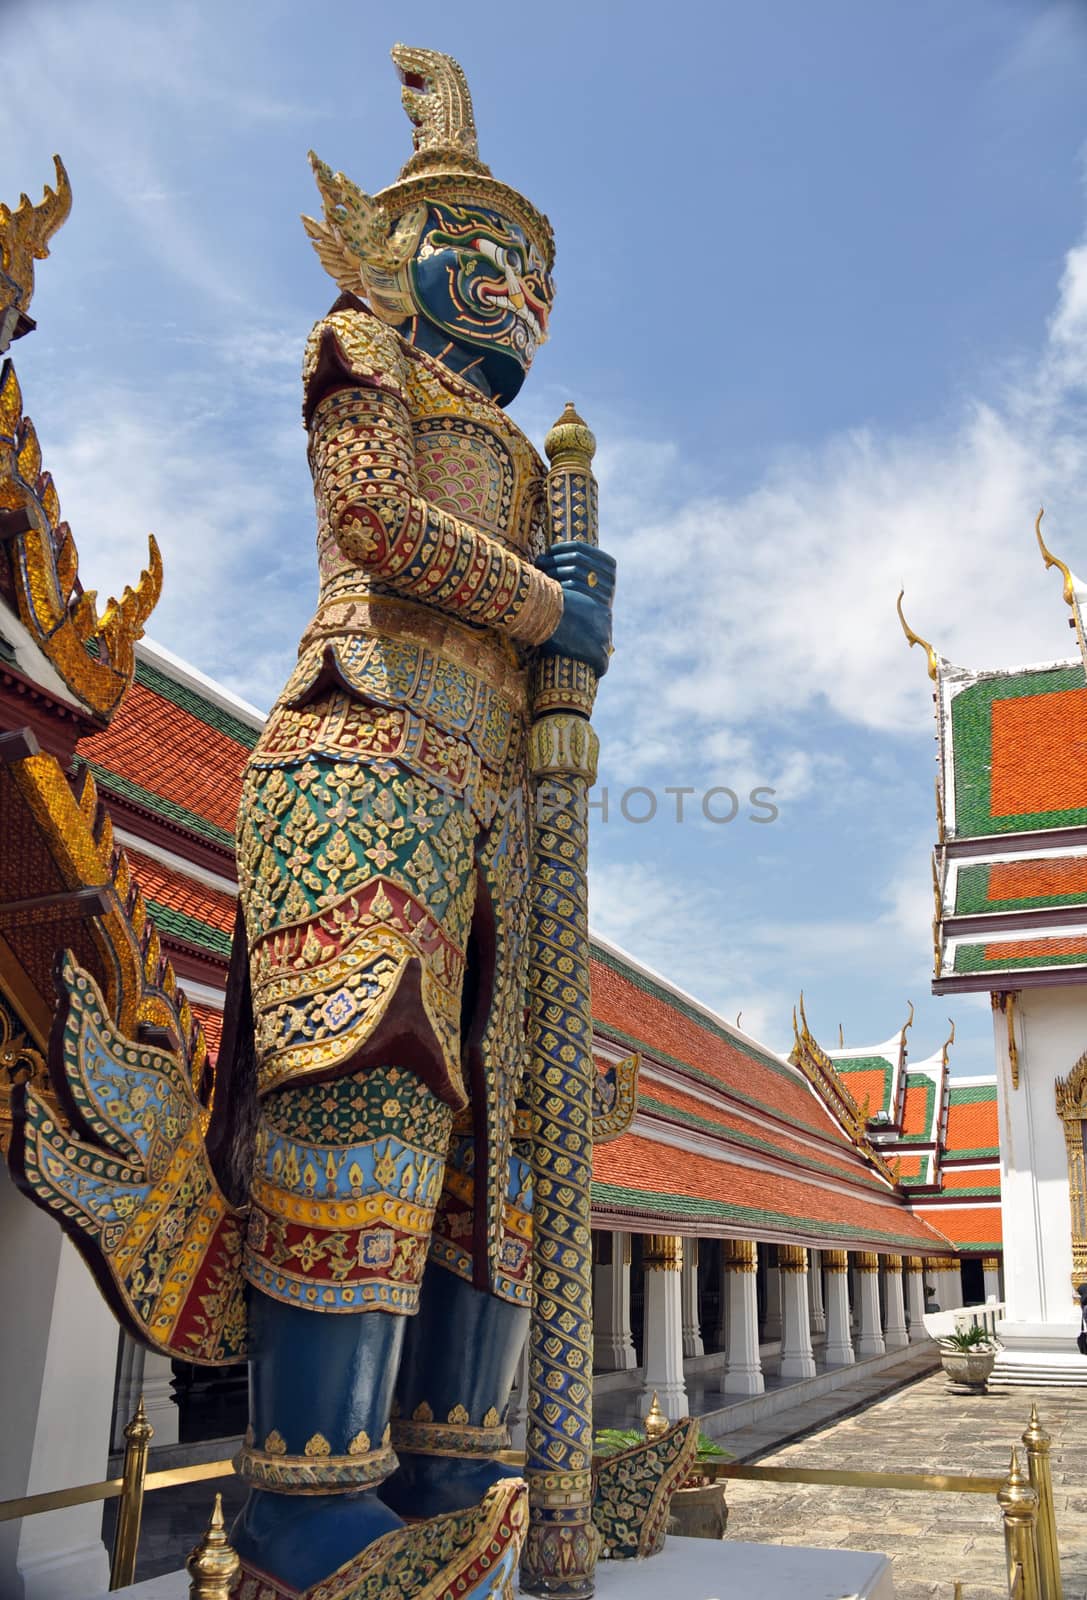 This statue is a guard outside the Chedi at the Grand Palace. Built as the final resting place of the Emerald Buddha ( Phra Kaeo) surrounded by the kings residence, it is Thailands holiest temple